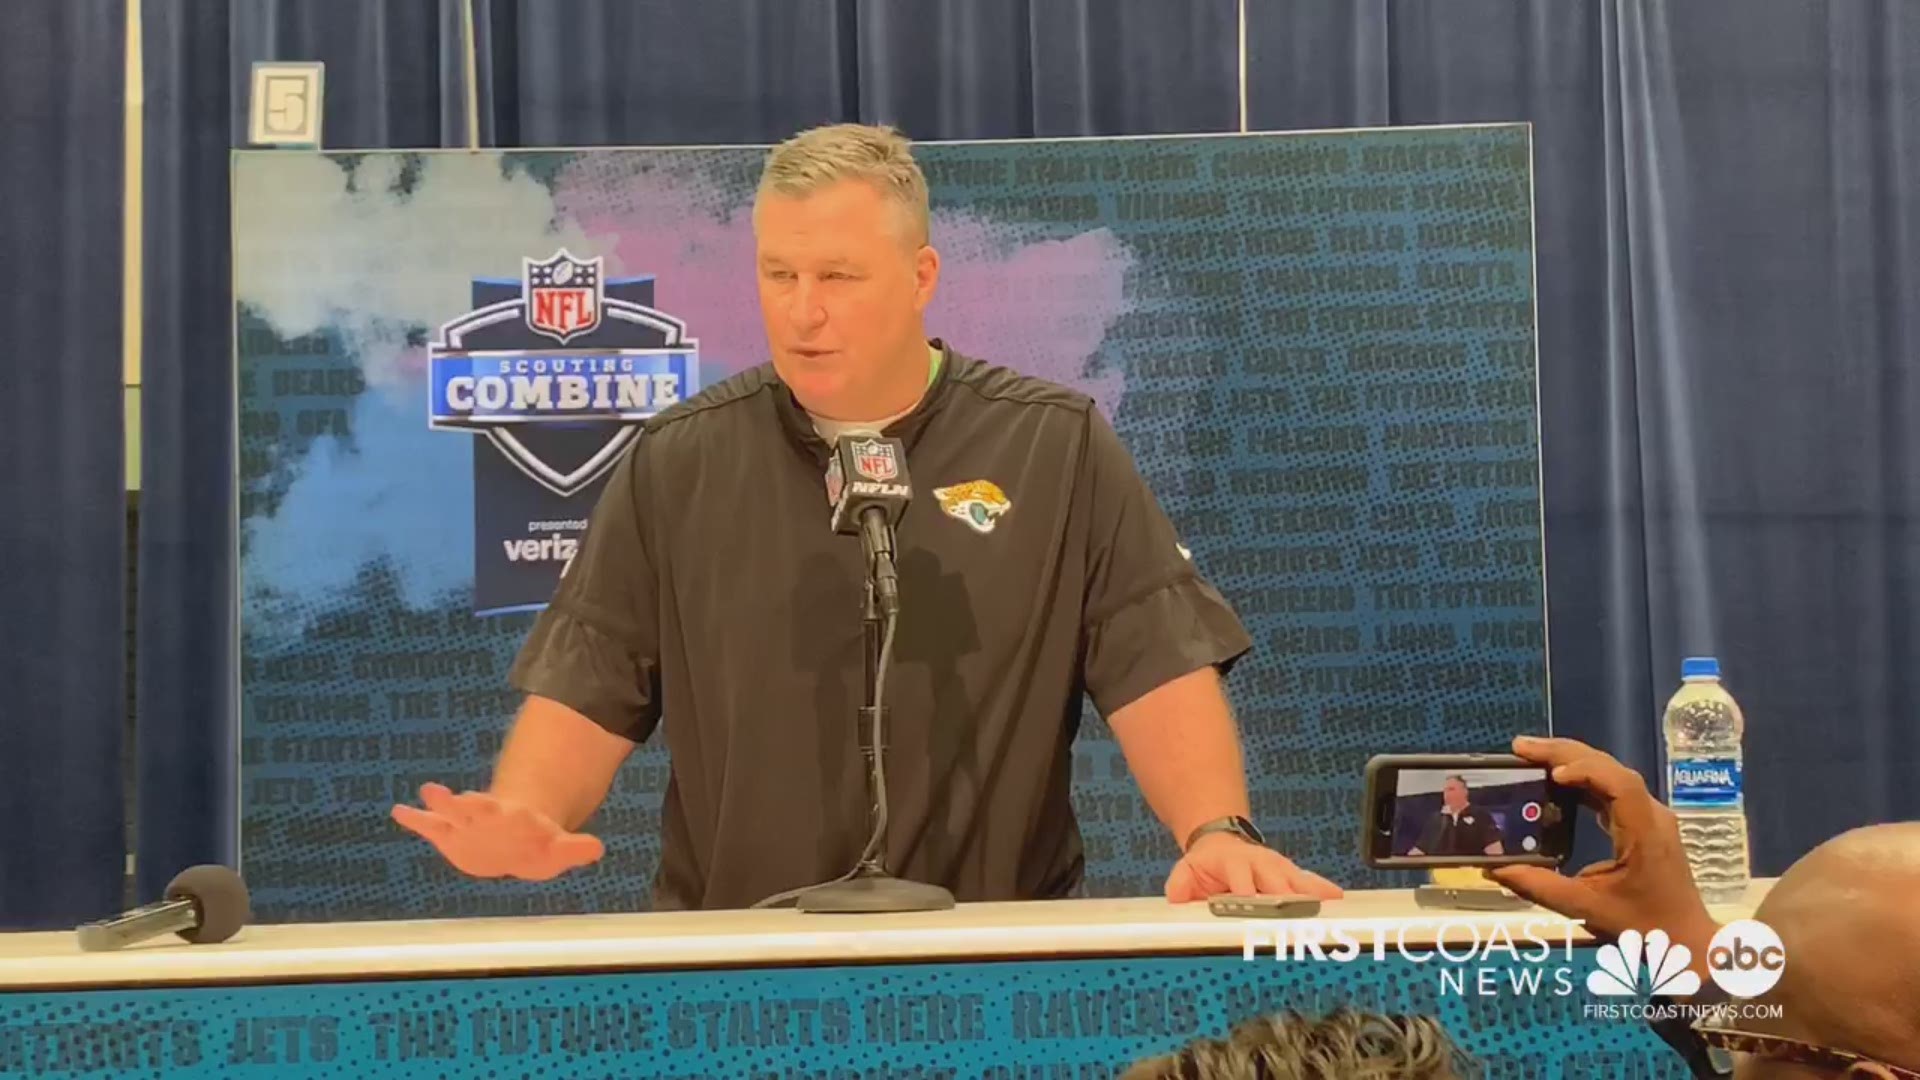 At the 2020 NFL Combine, head coach Doug Marrone talks about the two games being played in London.